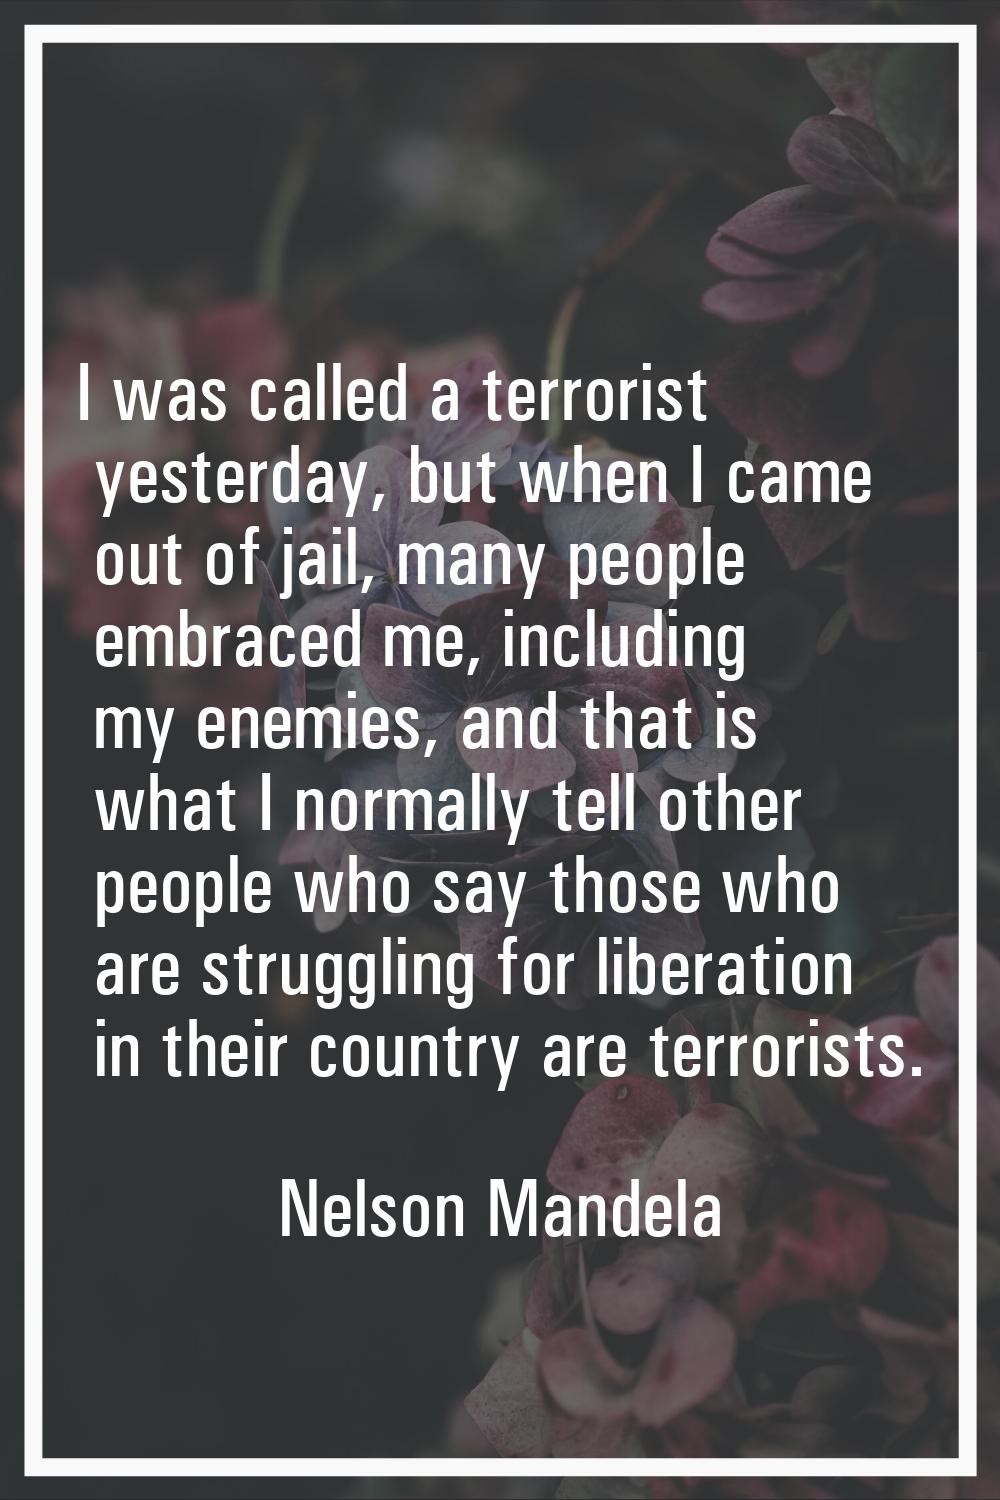 I was called a terrorist yesterday, but when I came out of jail, many people embraced me, including